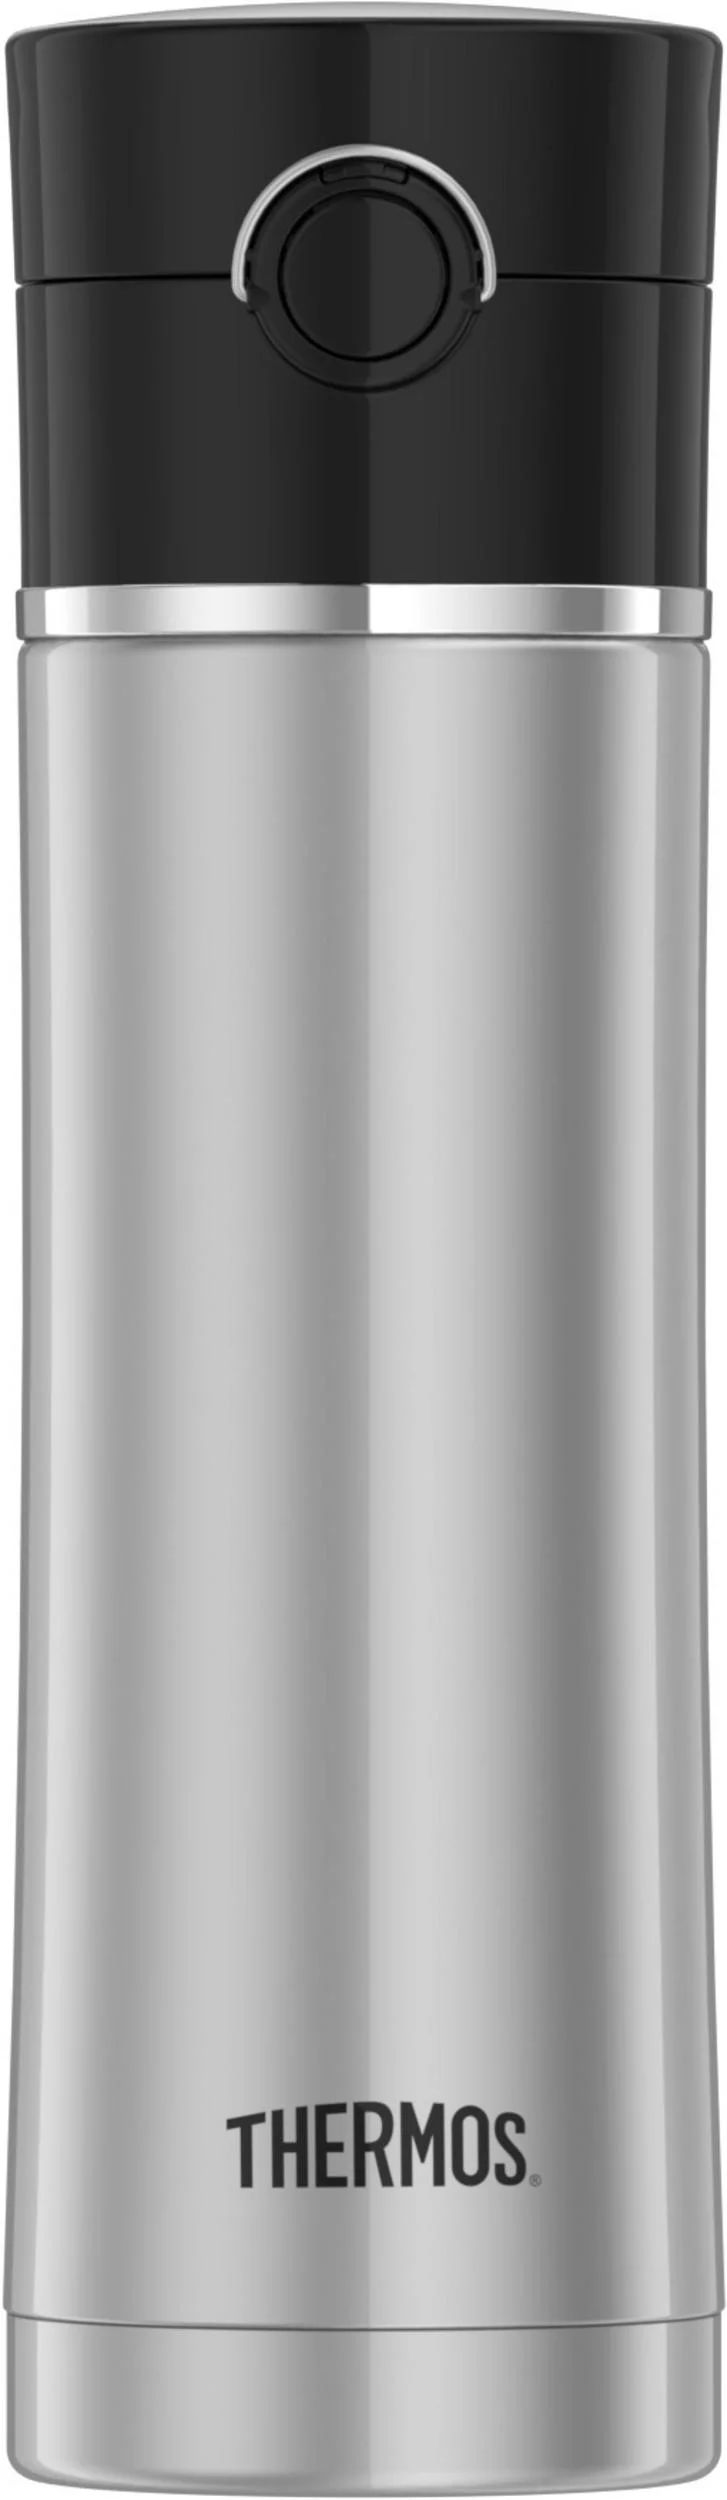 Thermos Sipp Stainless Steel Insulated 16-Ounce Drink Bottle Black | Walmart (US)